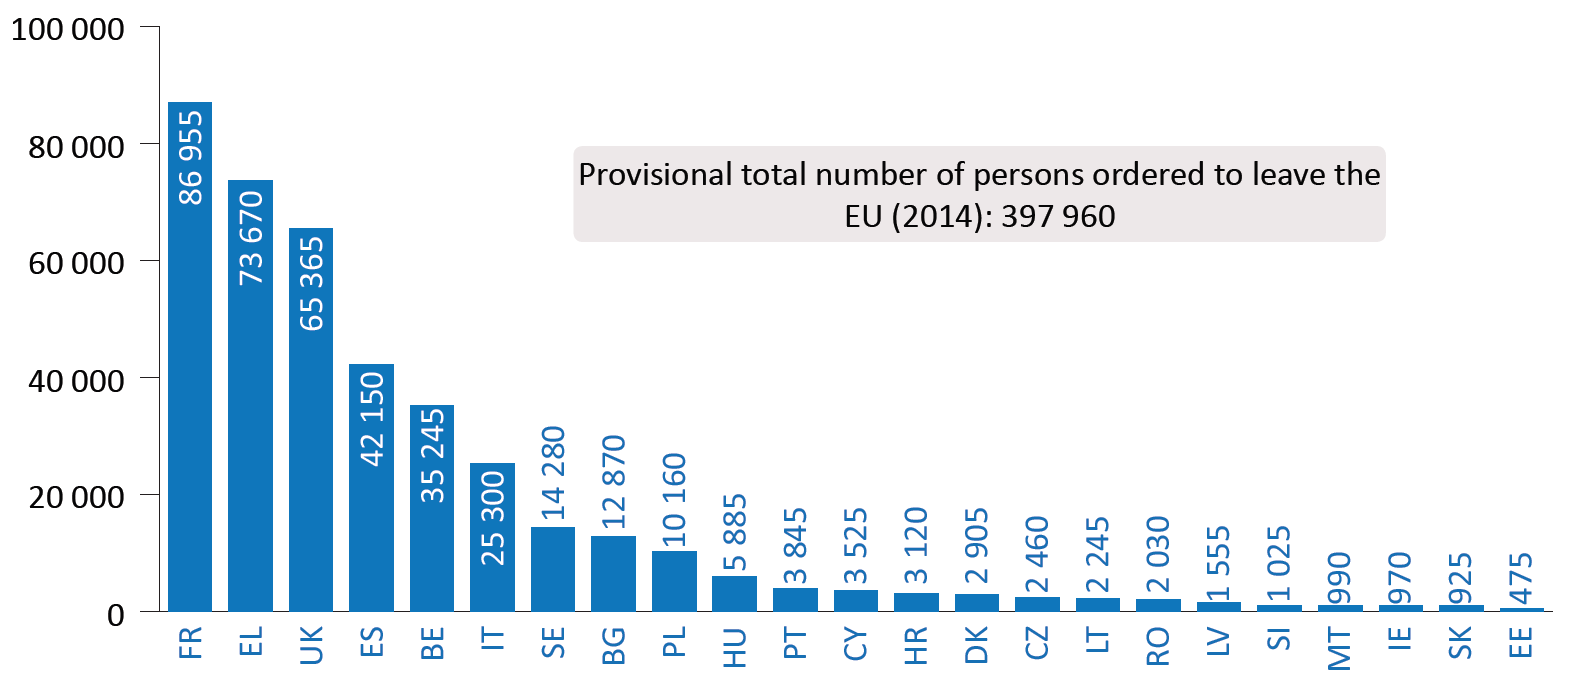 Number of persons ordered to leave the EU (2014)